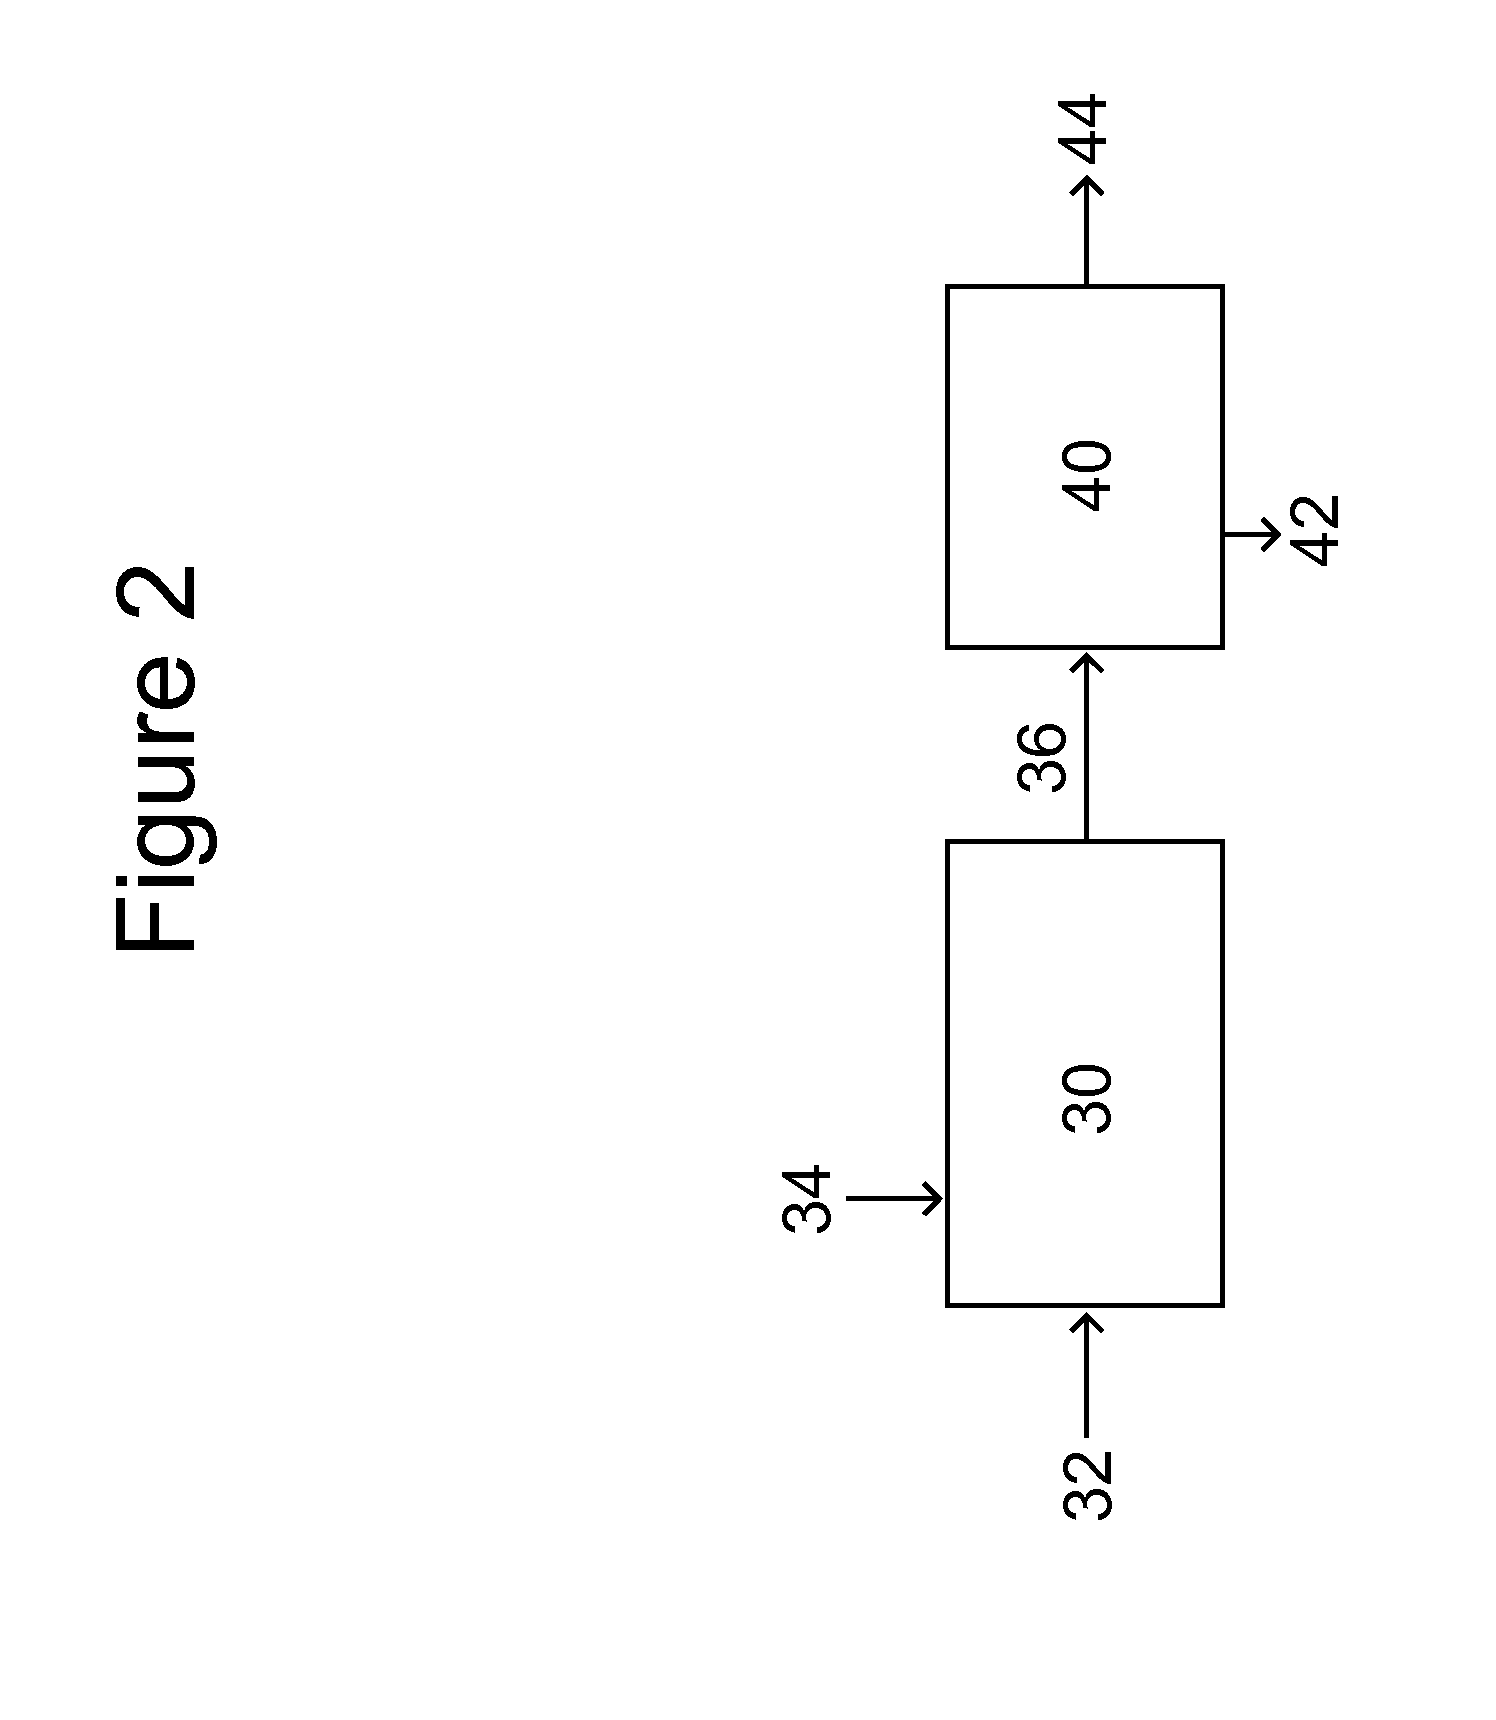 Staged Injection of Oxygen for Oxidative Coupling or Dehydrogenation Reactions